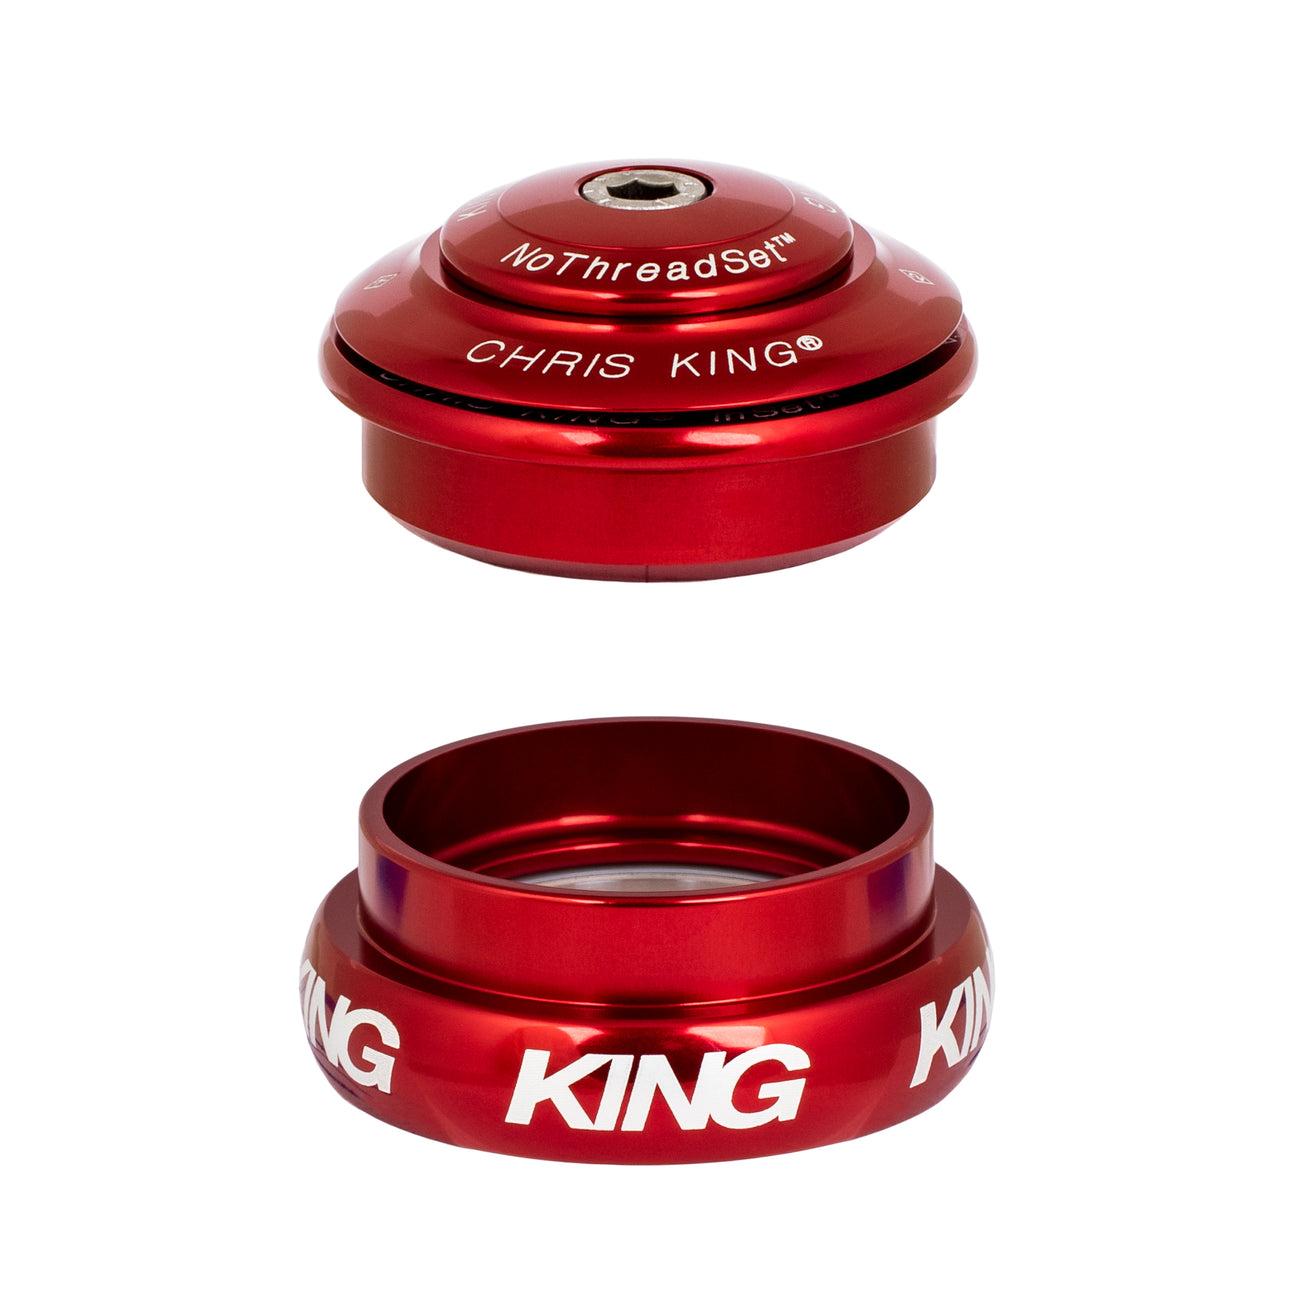 Chris King inset 8 headset in red